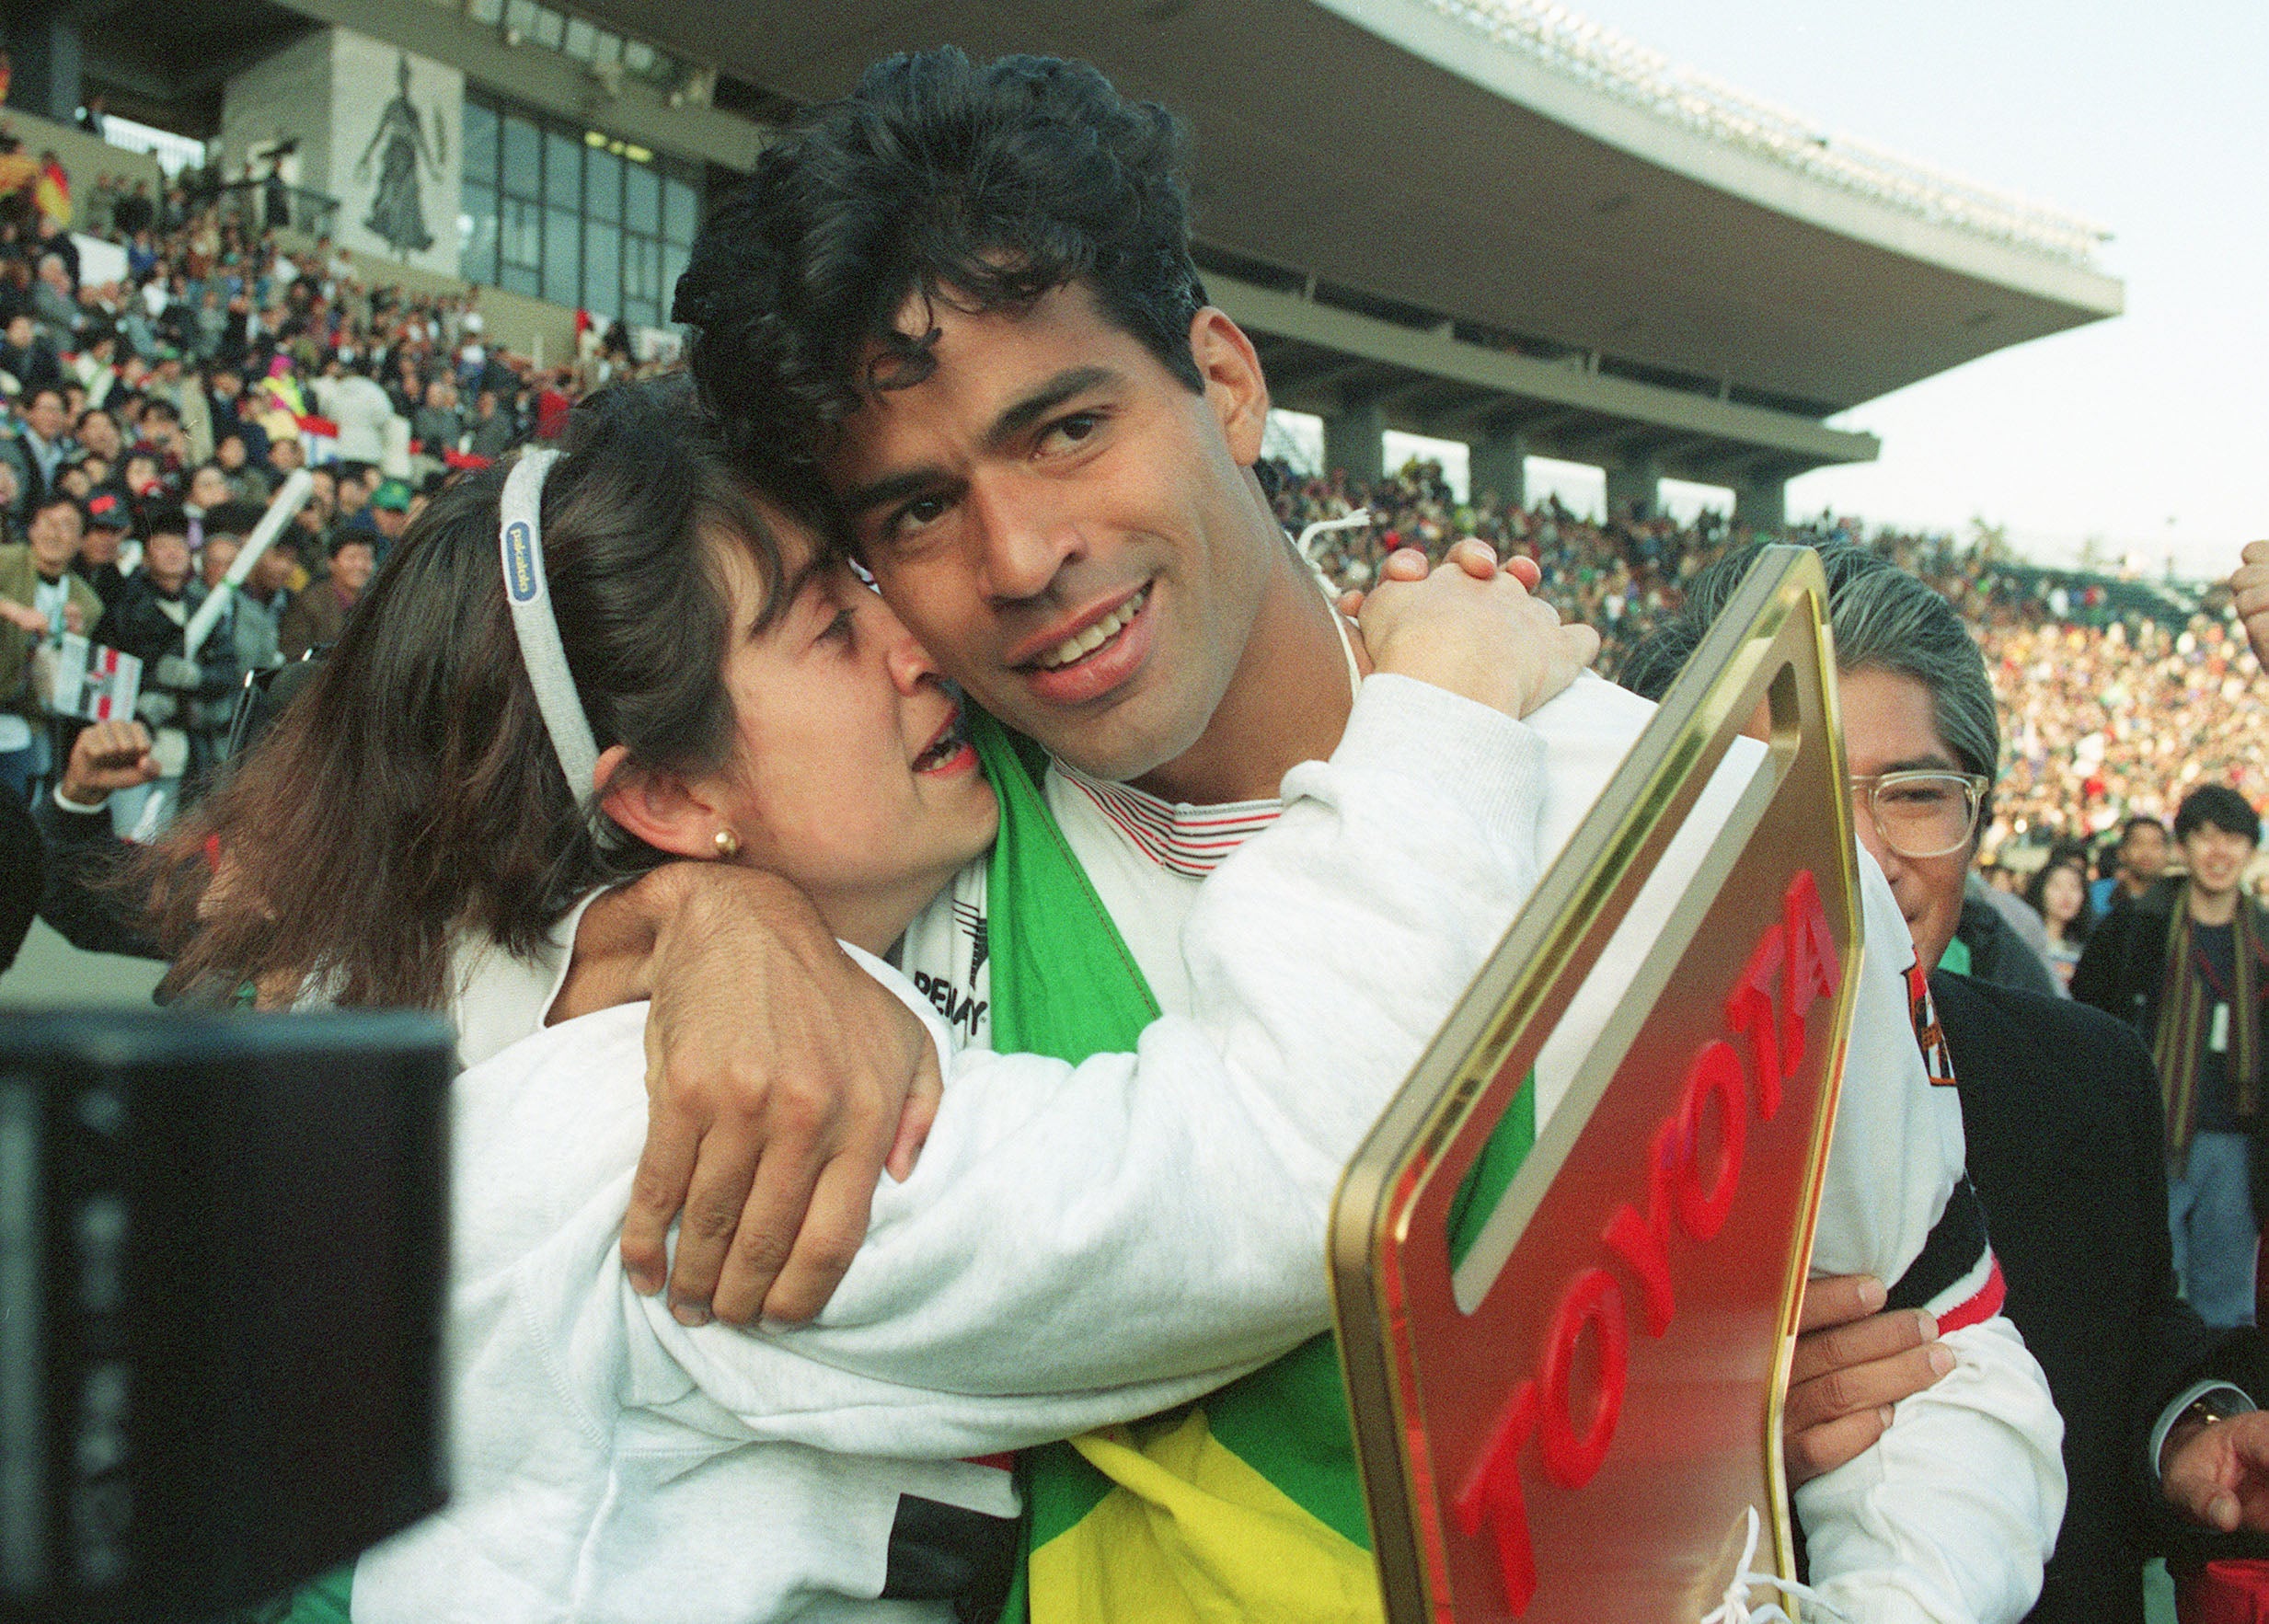 Sao Paulo captain and star striker Rai (R) hugs his wife after his team won the Inter-Continental Cup in 1992